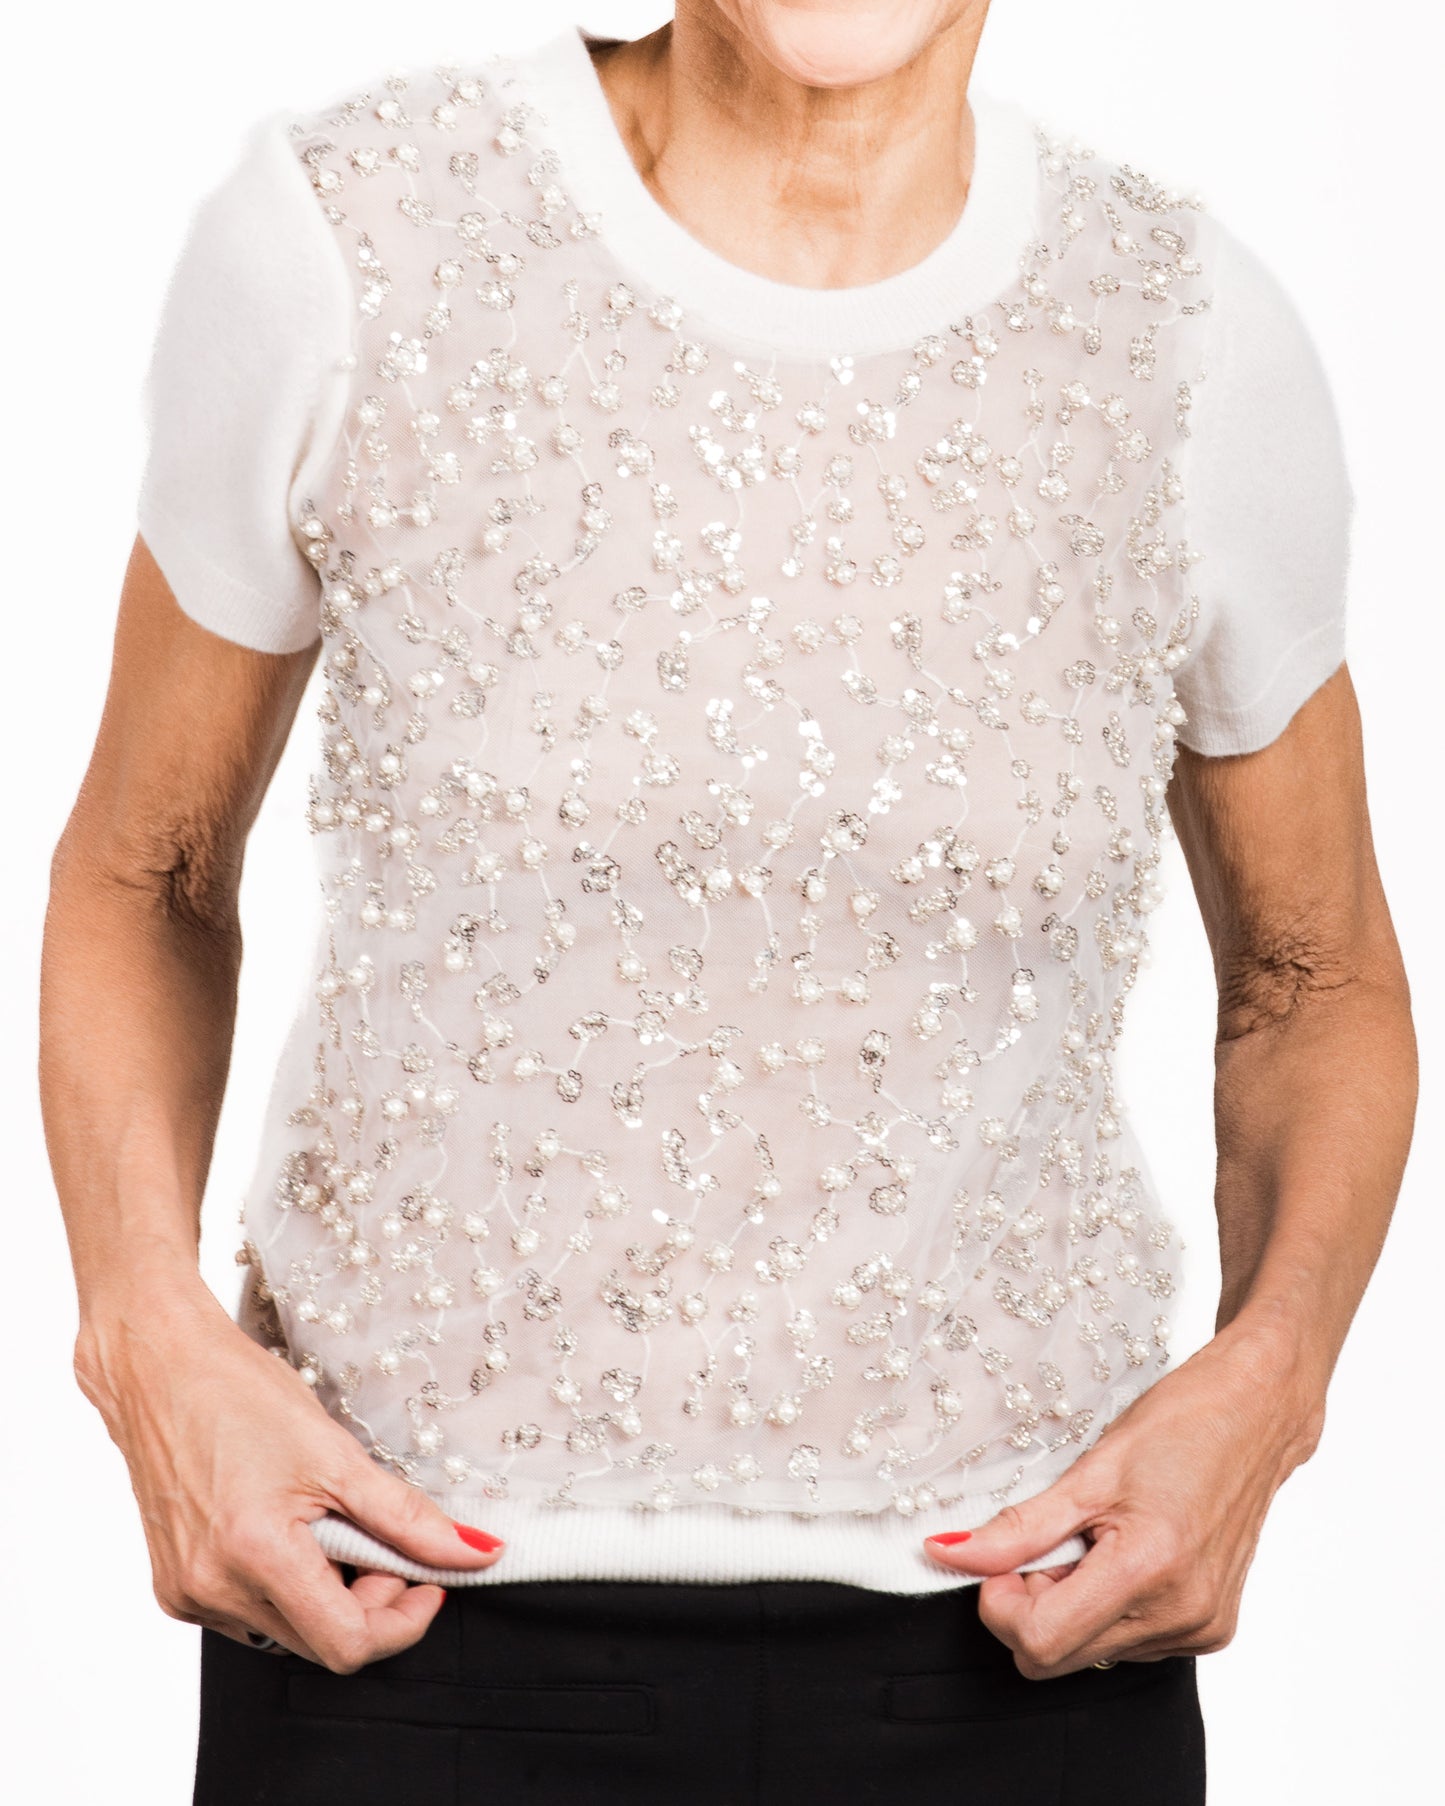 SMALL WHITE SHORT SLEEVE CREW NECK CASHMERE SWEATER WITH PEARL, CRYSTAL AND MINI SEQUIN BEADING EMBROIDERED ON WHITE TULLE FRONT WITH WHITE SILK ORGANZA LINING